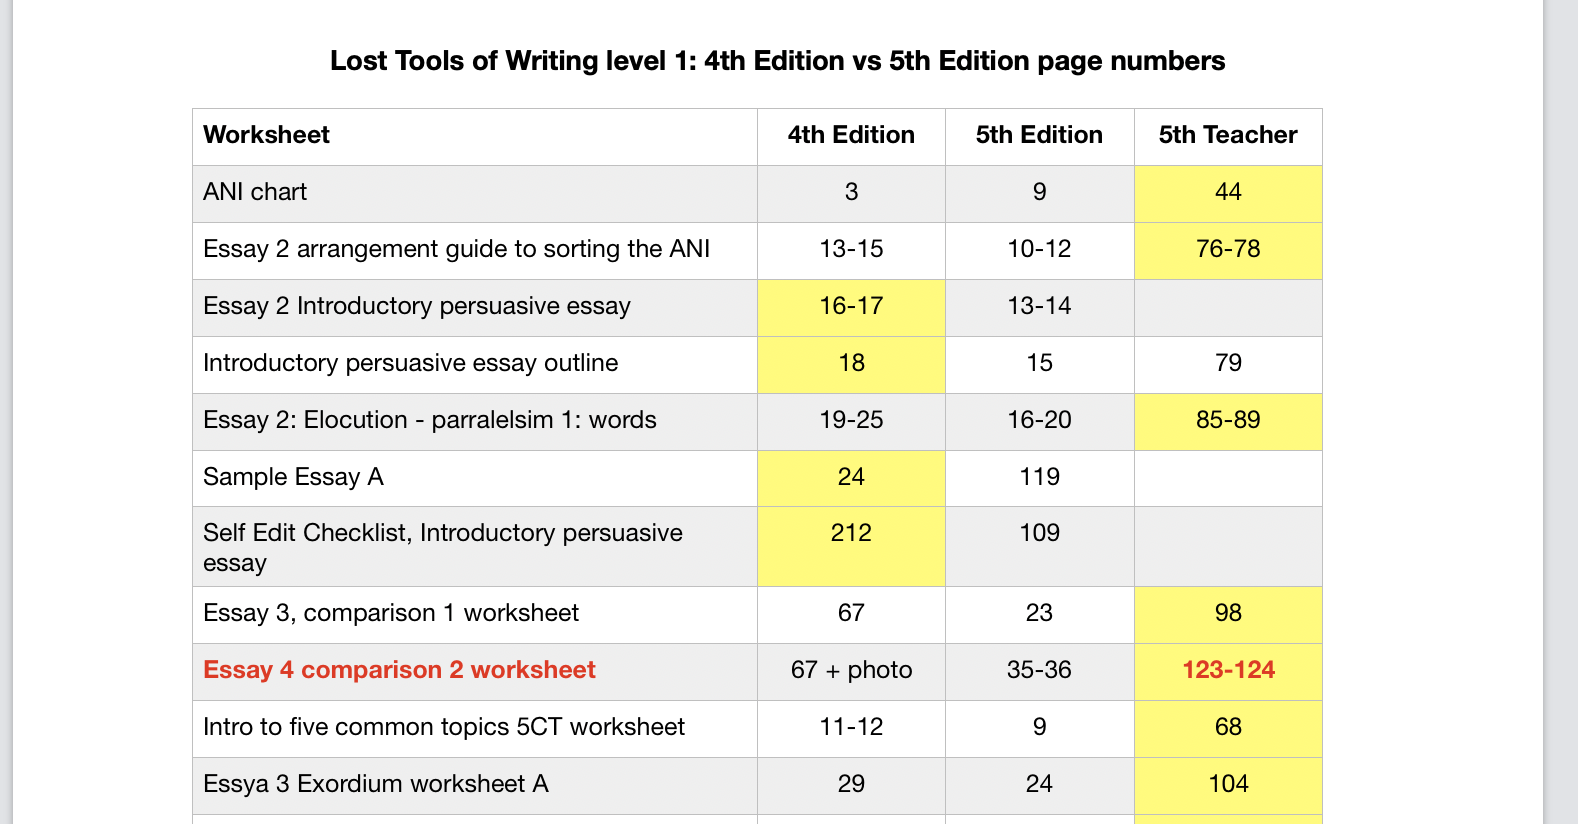 lost tools of writing 4th edition vs 5th edition